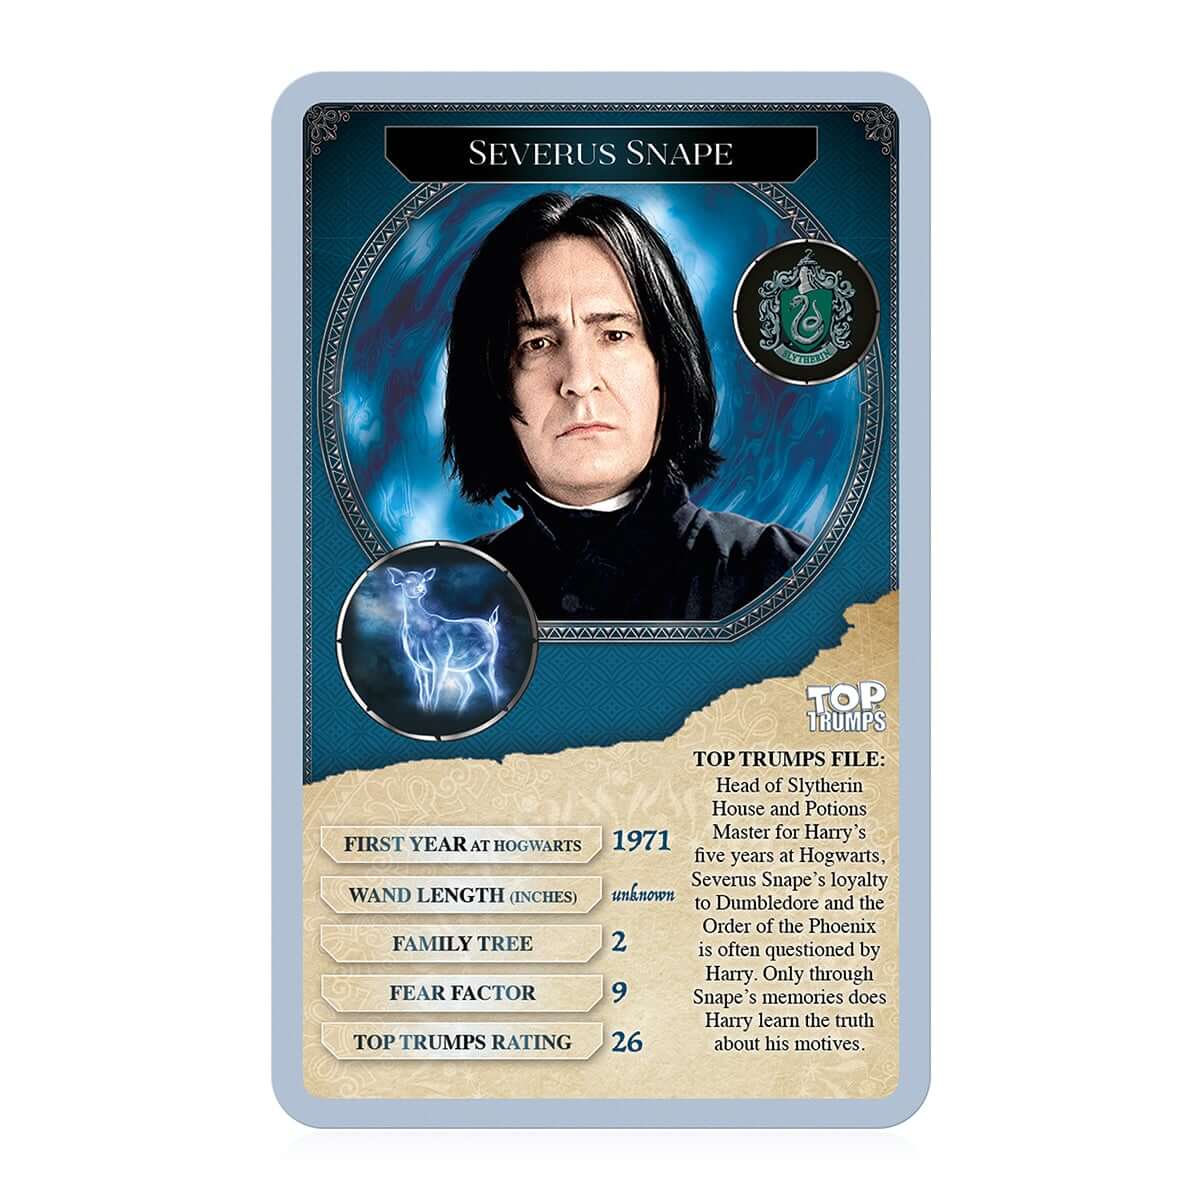 Harry Potter - 30 Witches & Wizards Top Trumps Card Game